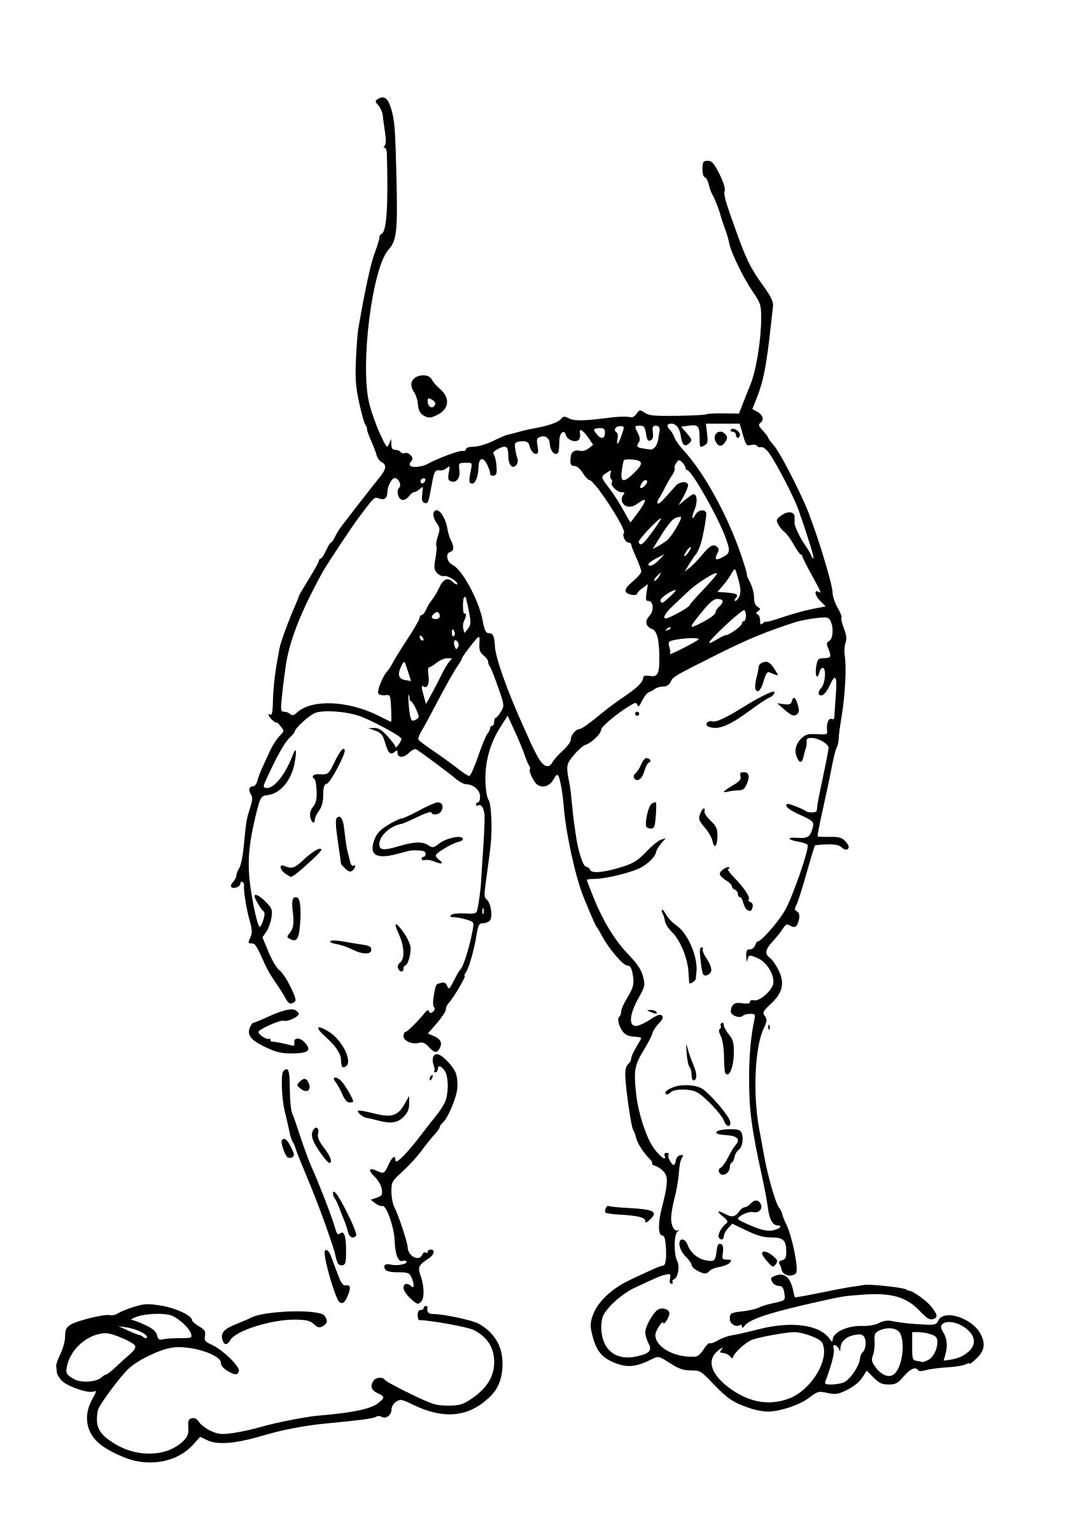 Legs With Swimshorts png transparent